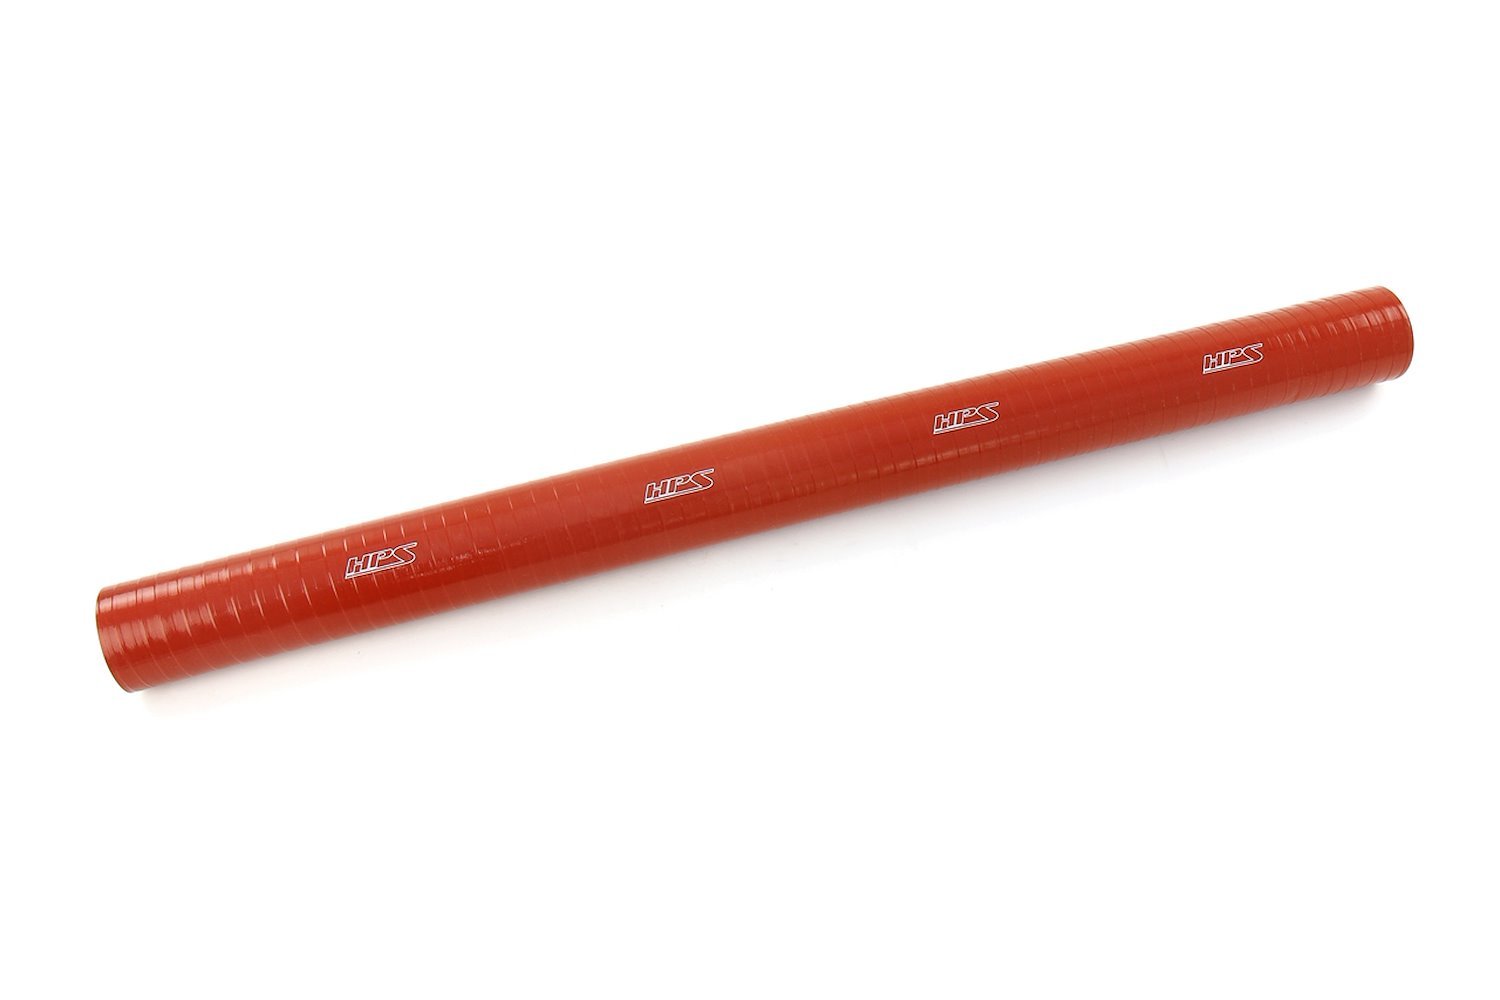 ST-3F-225-HOT Silicone Coolant Tube, Ultra High-Temp 4-Ply Reinforced, 2-1/4 in. ID, 3 ft. Long